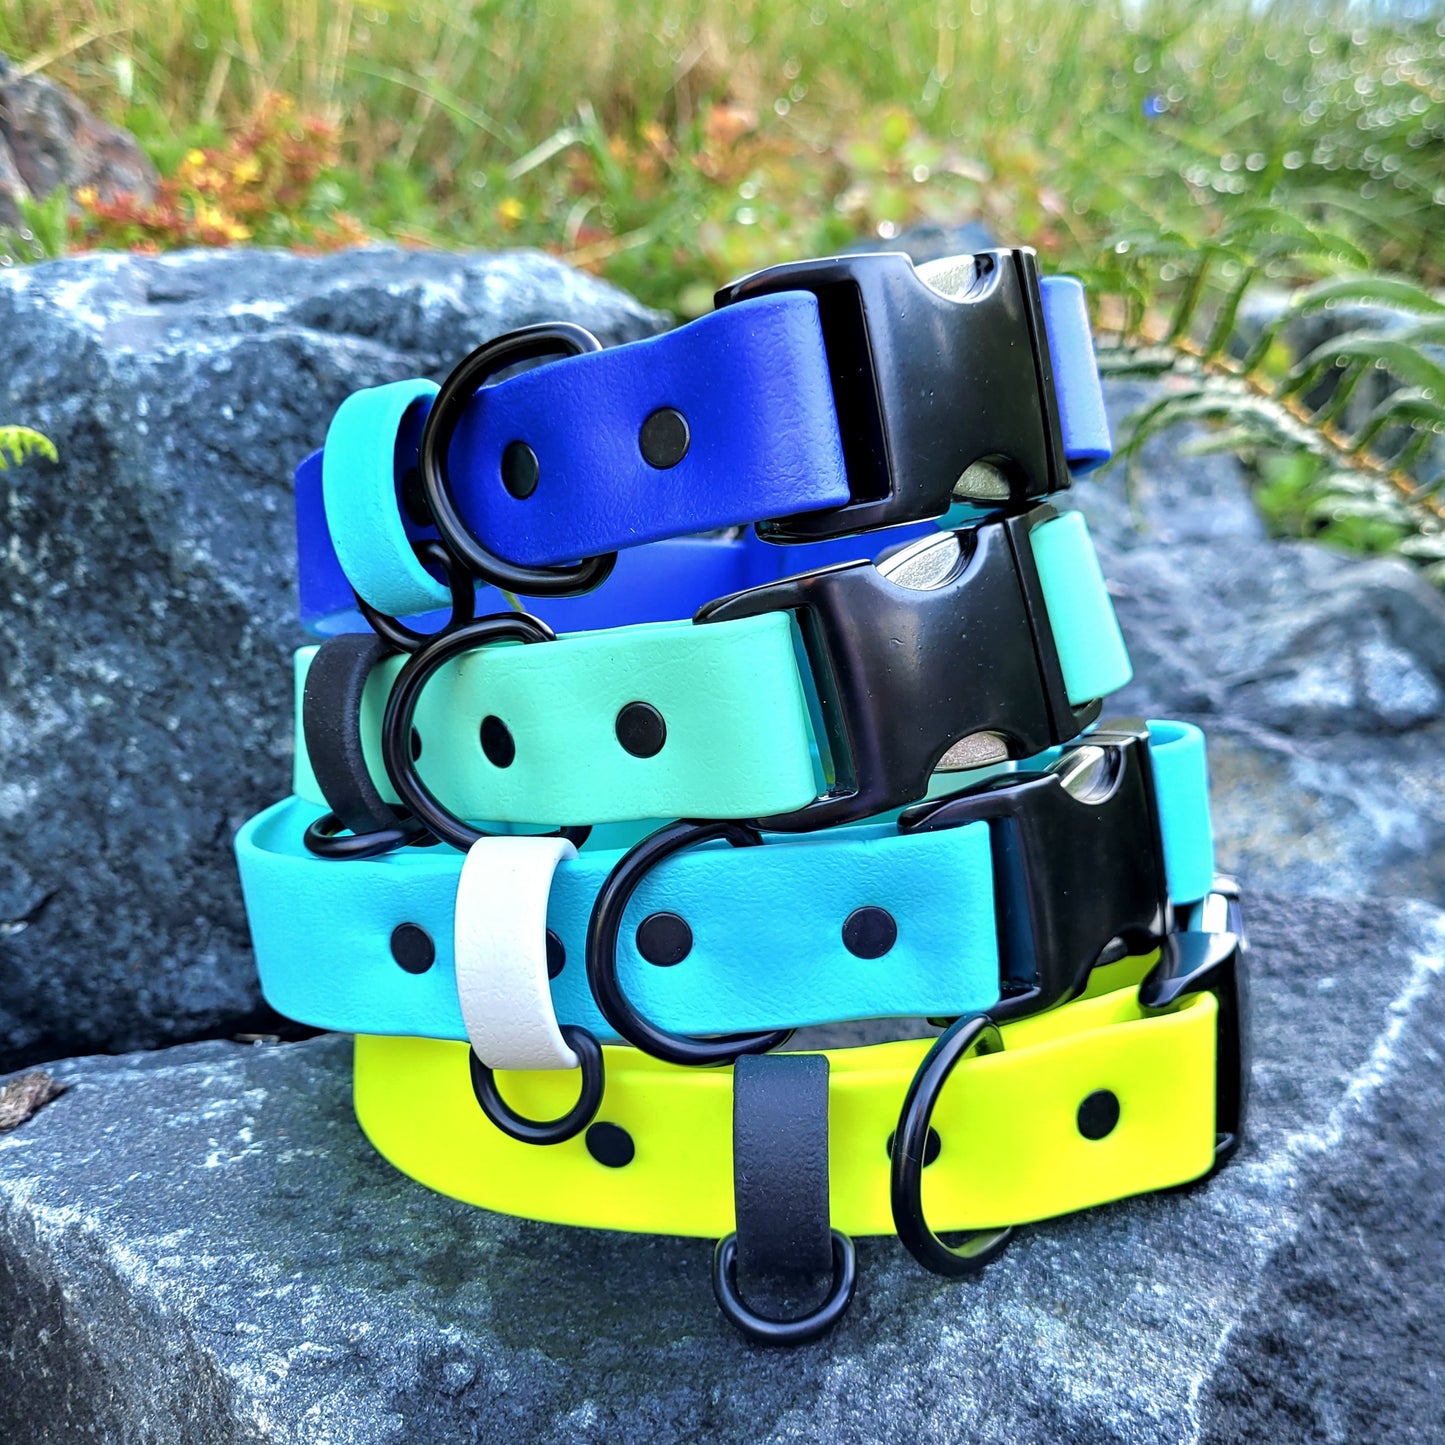 From top to bottom: Royal blue and sky blue, sea foam and black, sky blue and white, neon yellow and black